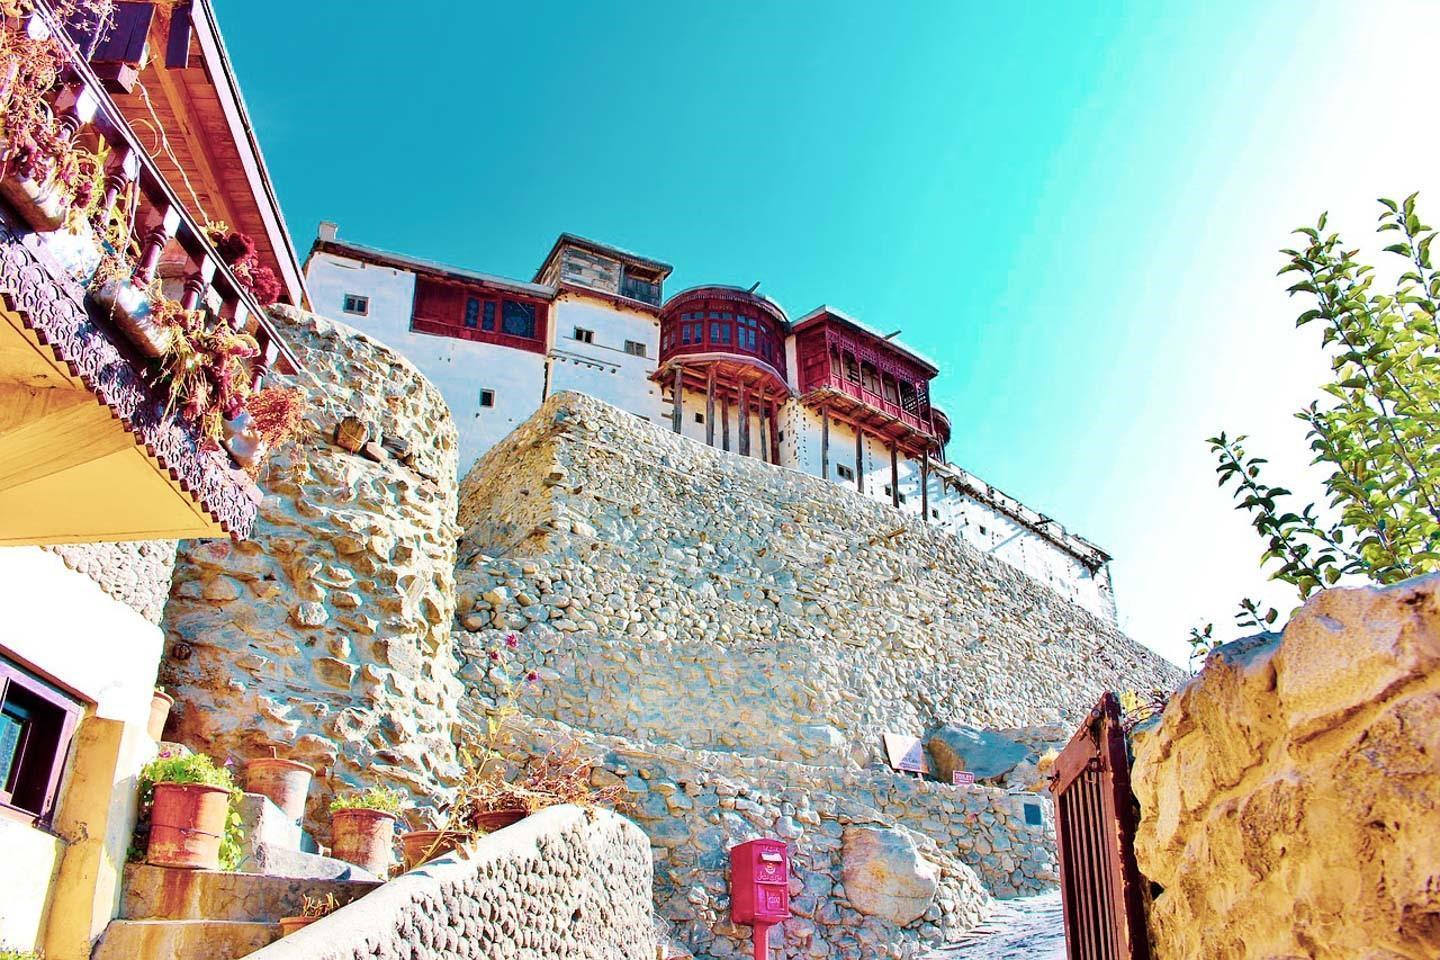 Baltit Fort, offering an insight into the heritage and traditions of royal inhabitants